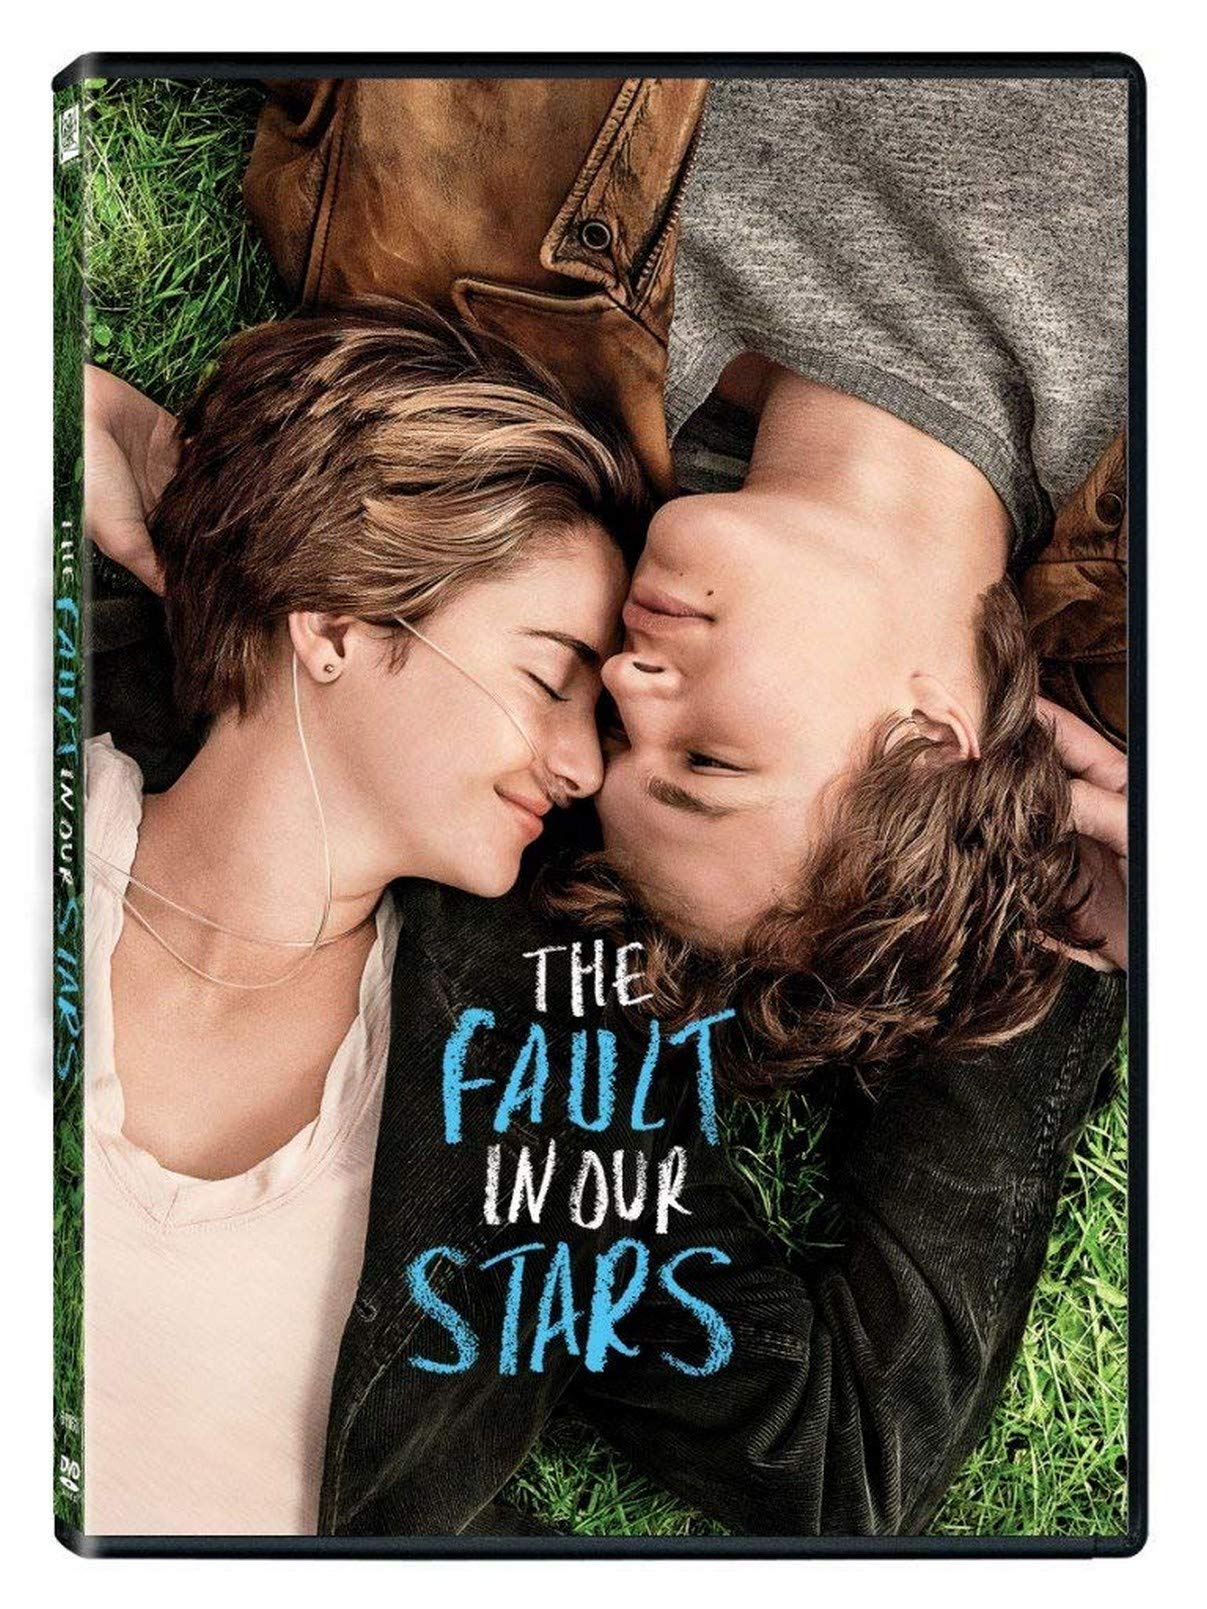 the-fault-in-our-stars-dvd-movie-purchase-or-watch-online